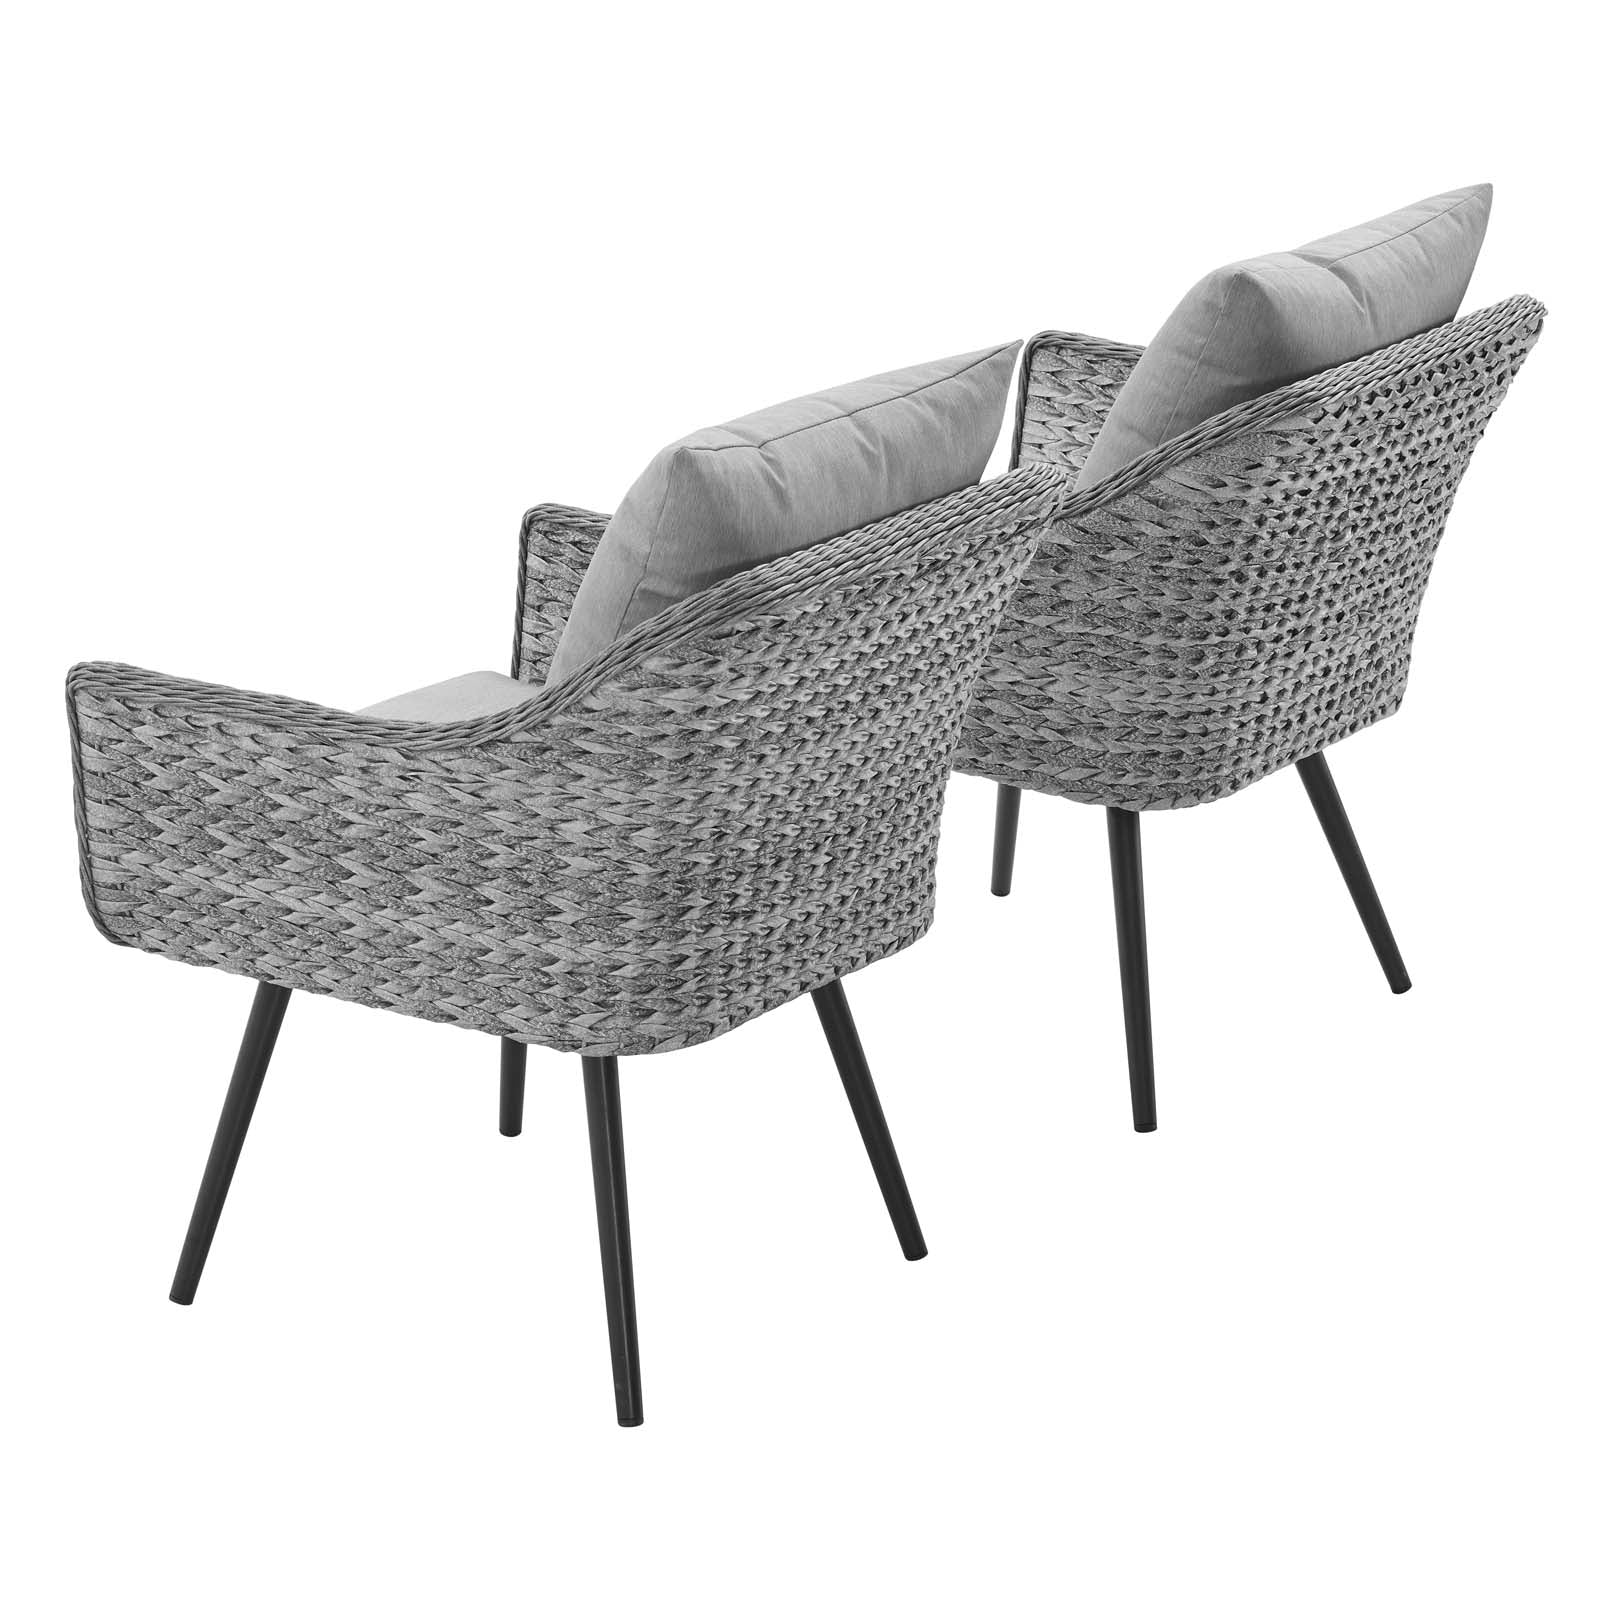 Modway Outdoor Chairs - Endeavor Armchair Outdoor Patio Gray (Set Of 2)